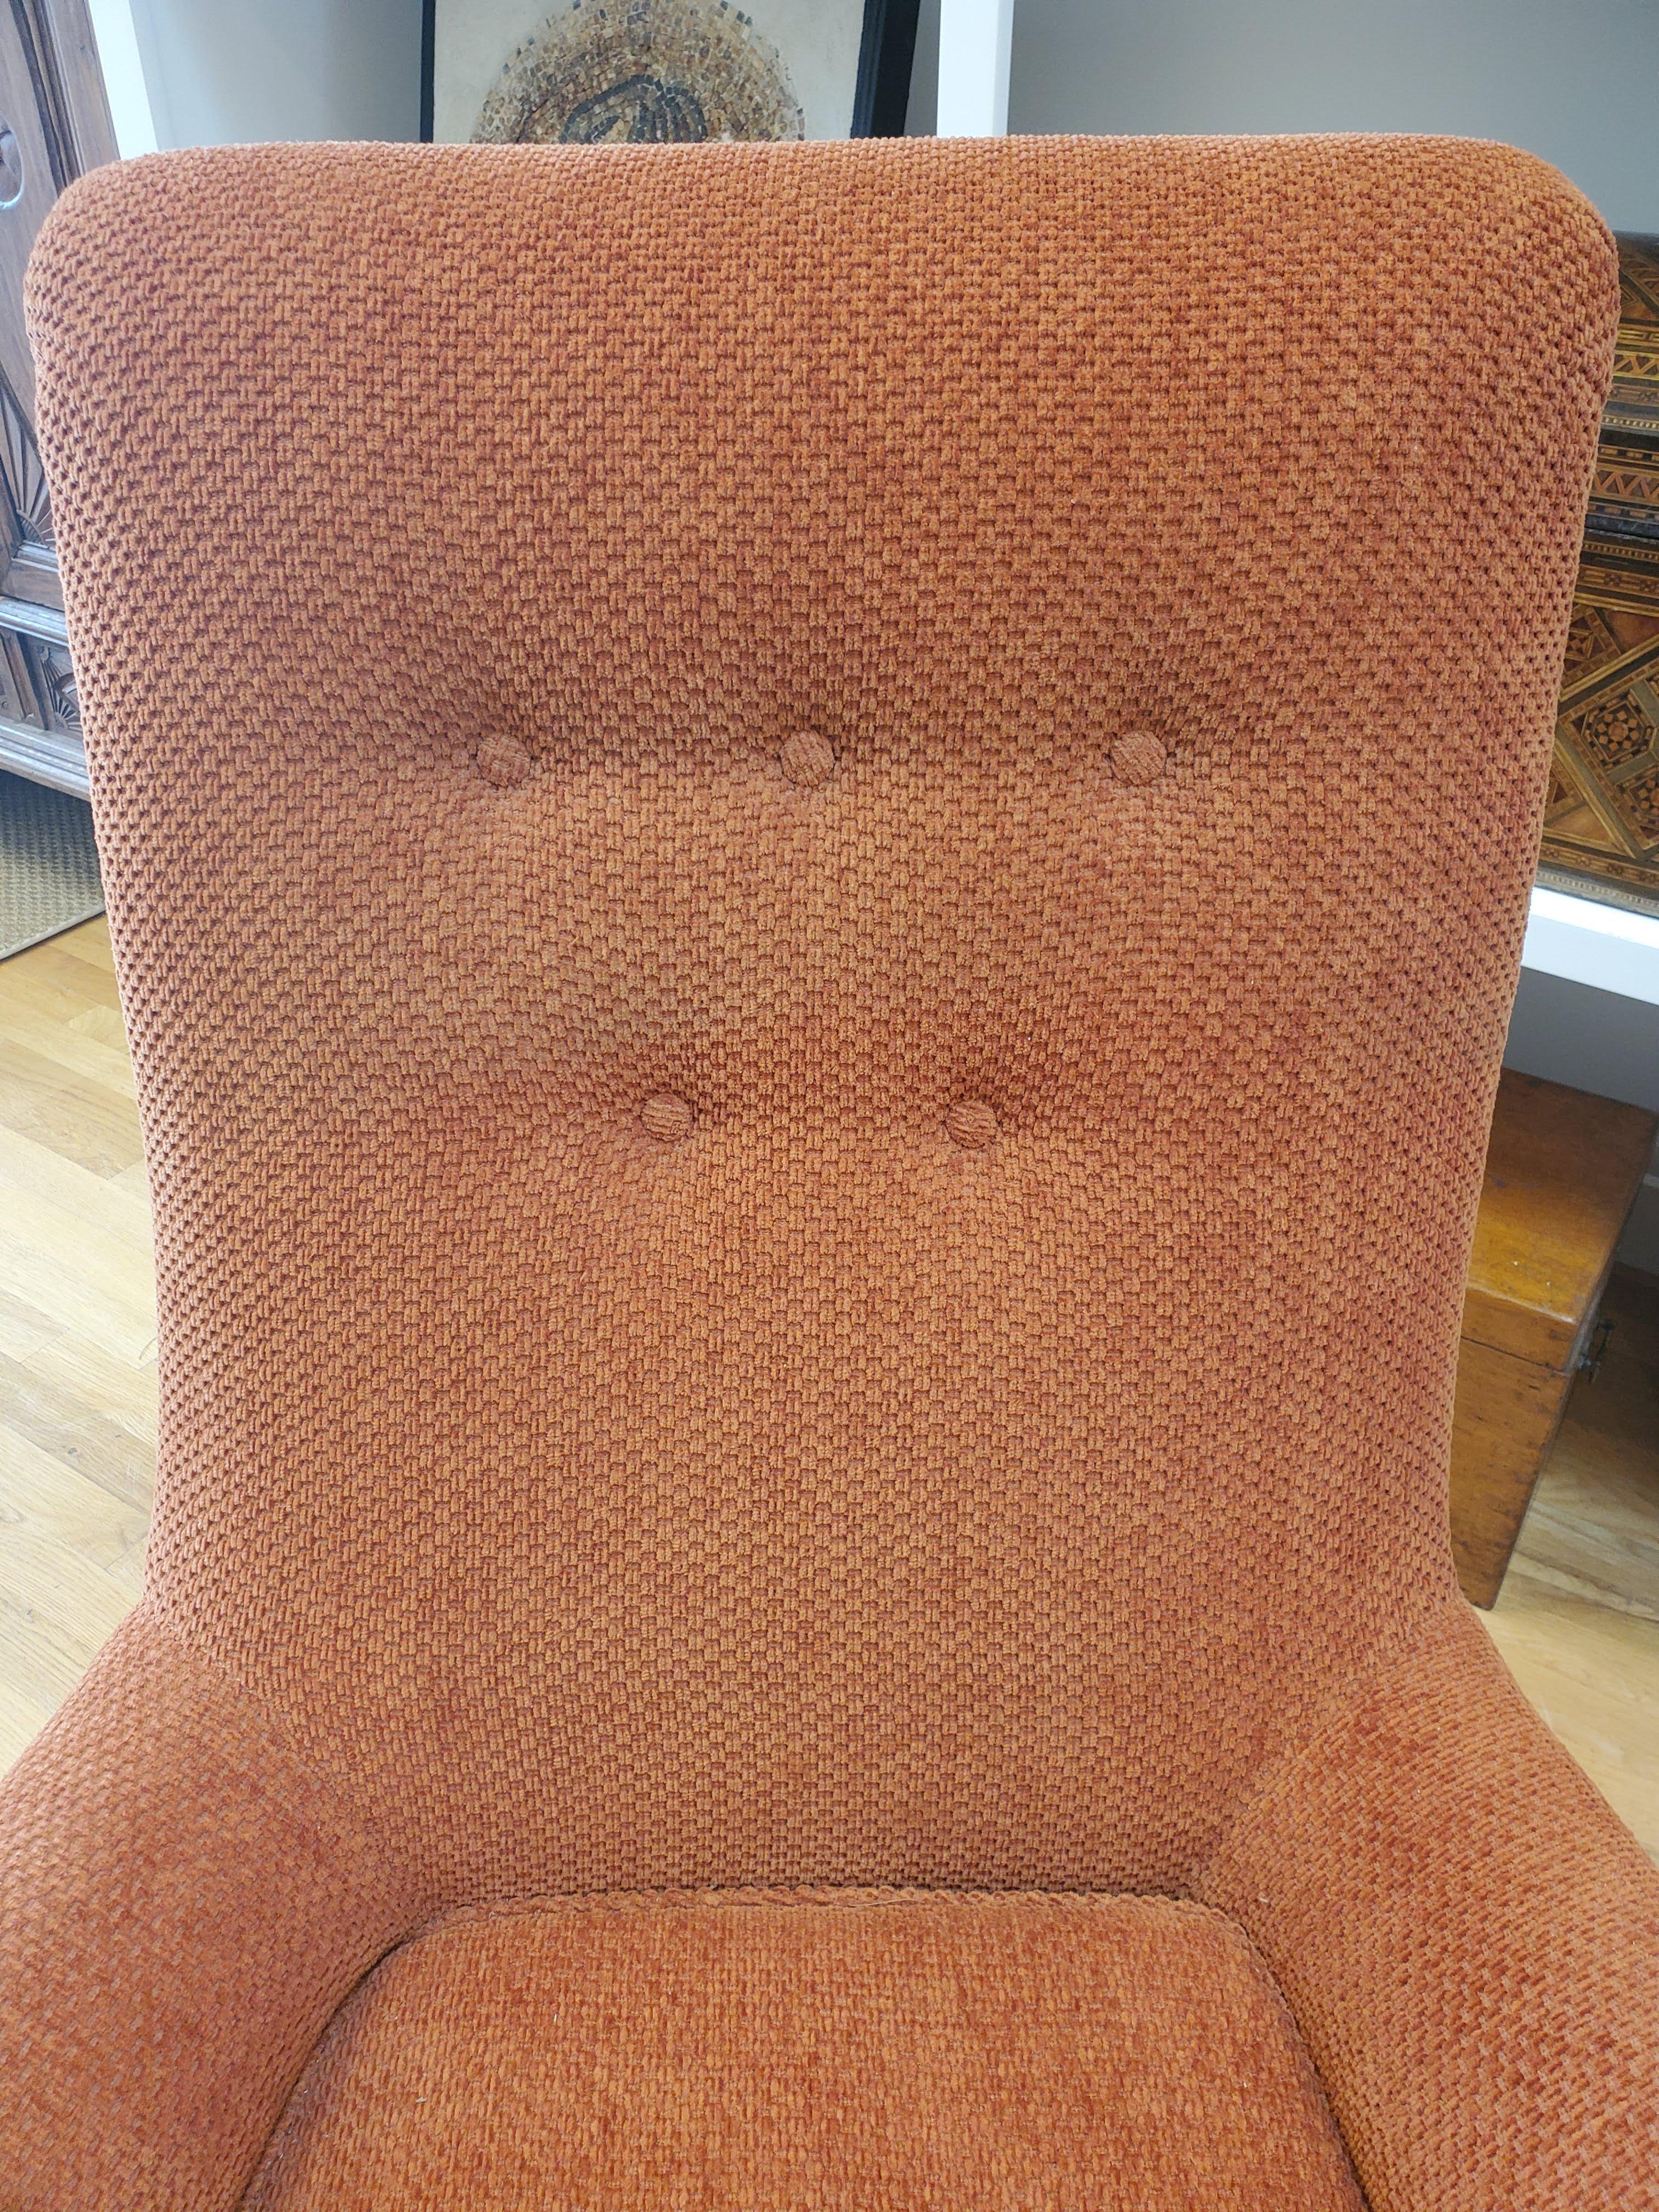 Pair of 19th Century English Club Chairs with Orange Chenille Upholstery For Sale 7